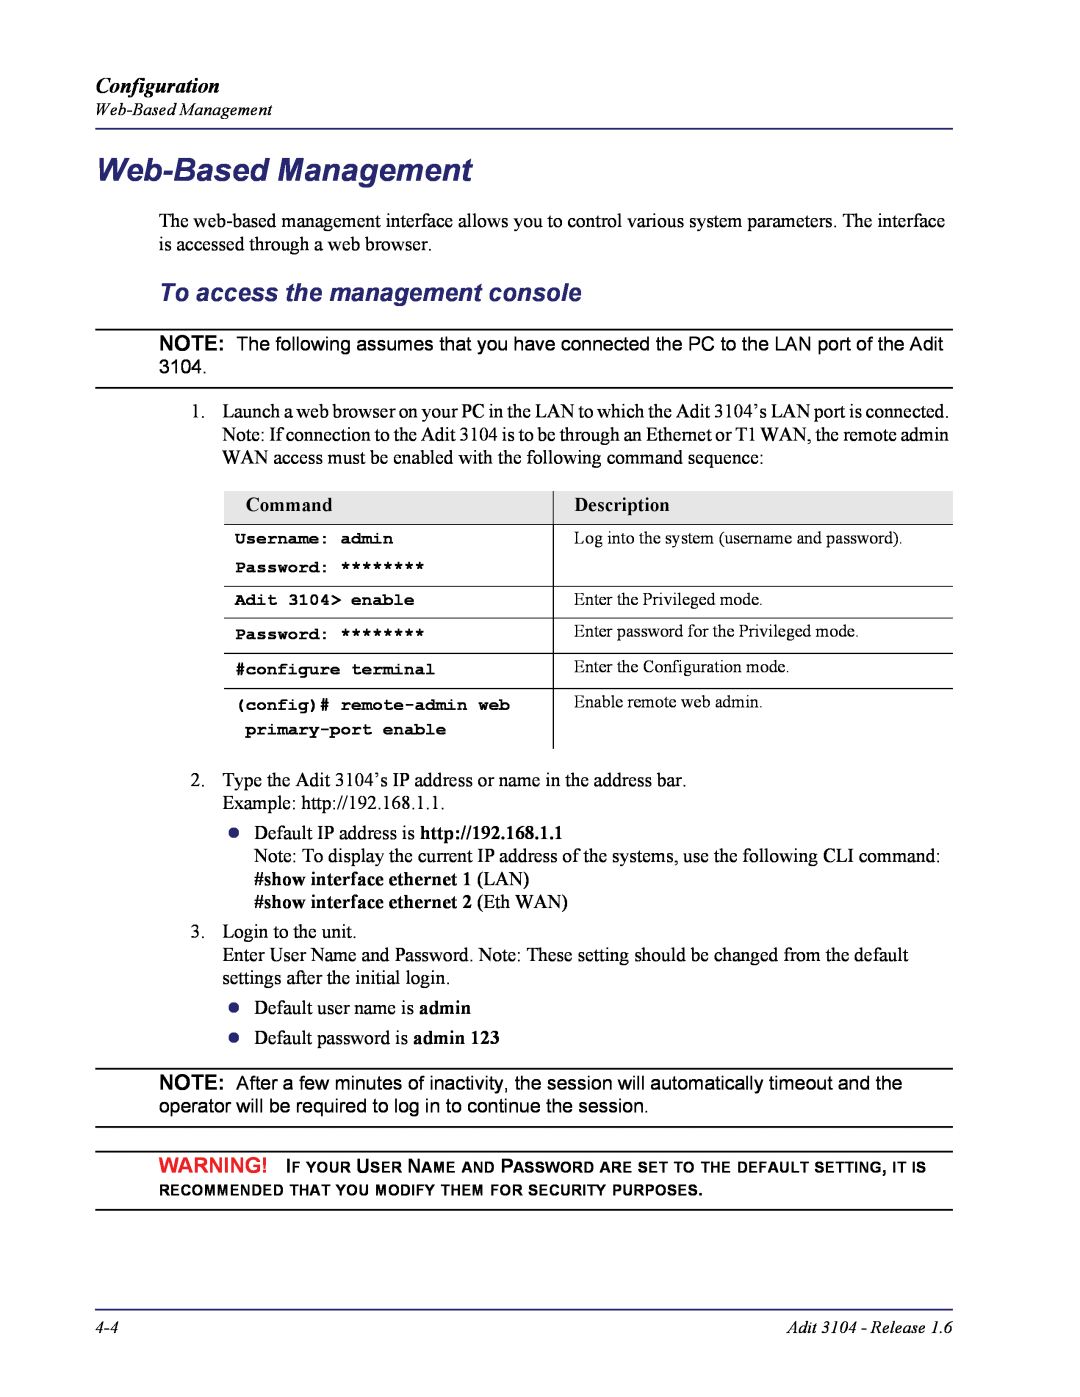 Carrier Access Adit 3104 user manual Web-Based Management, To access the management console, Configuration 